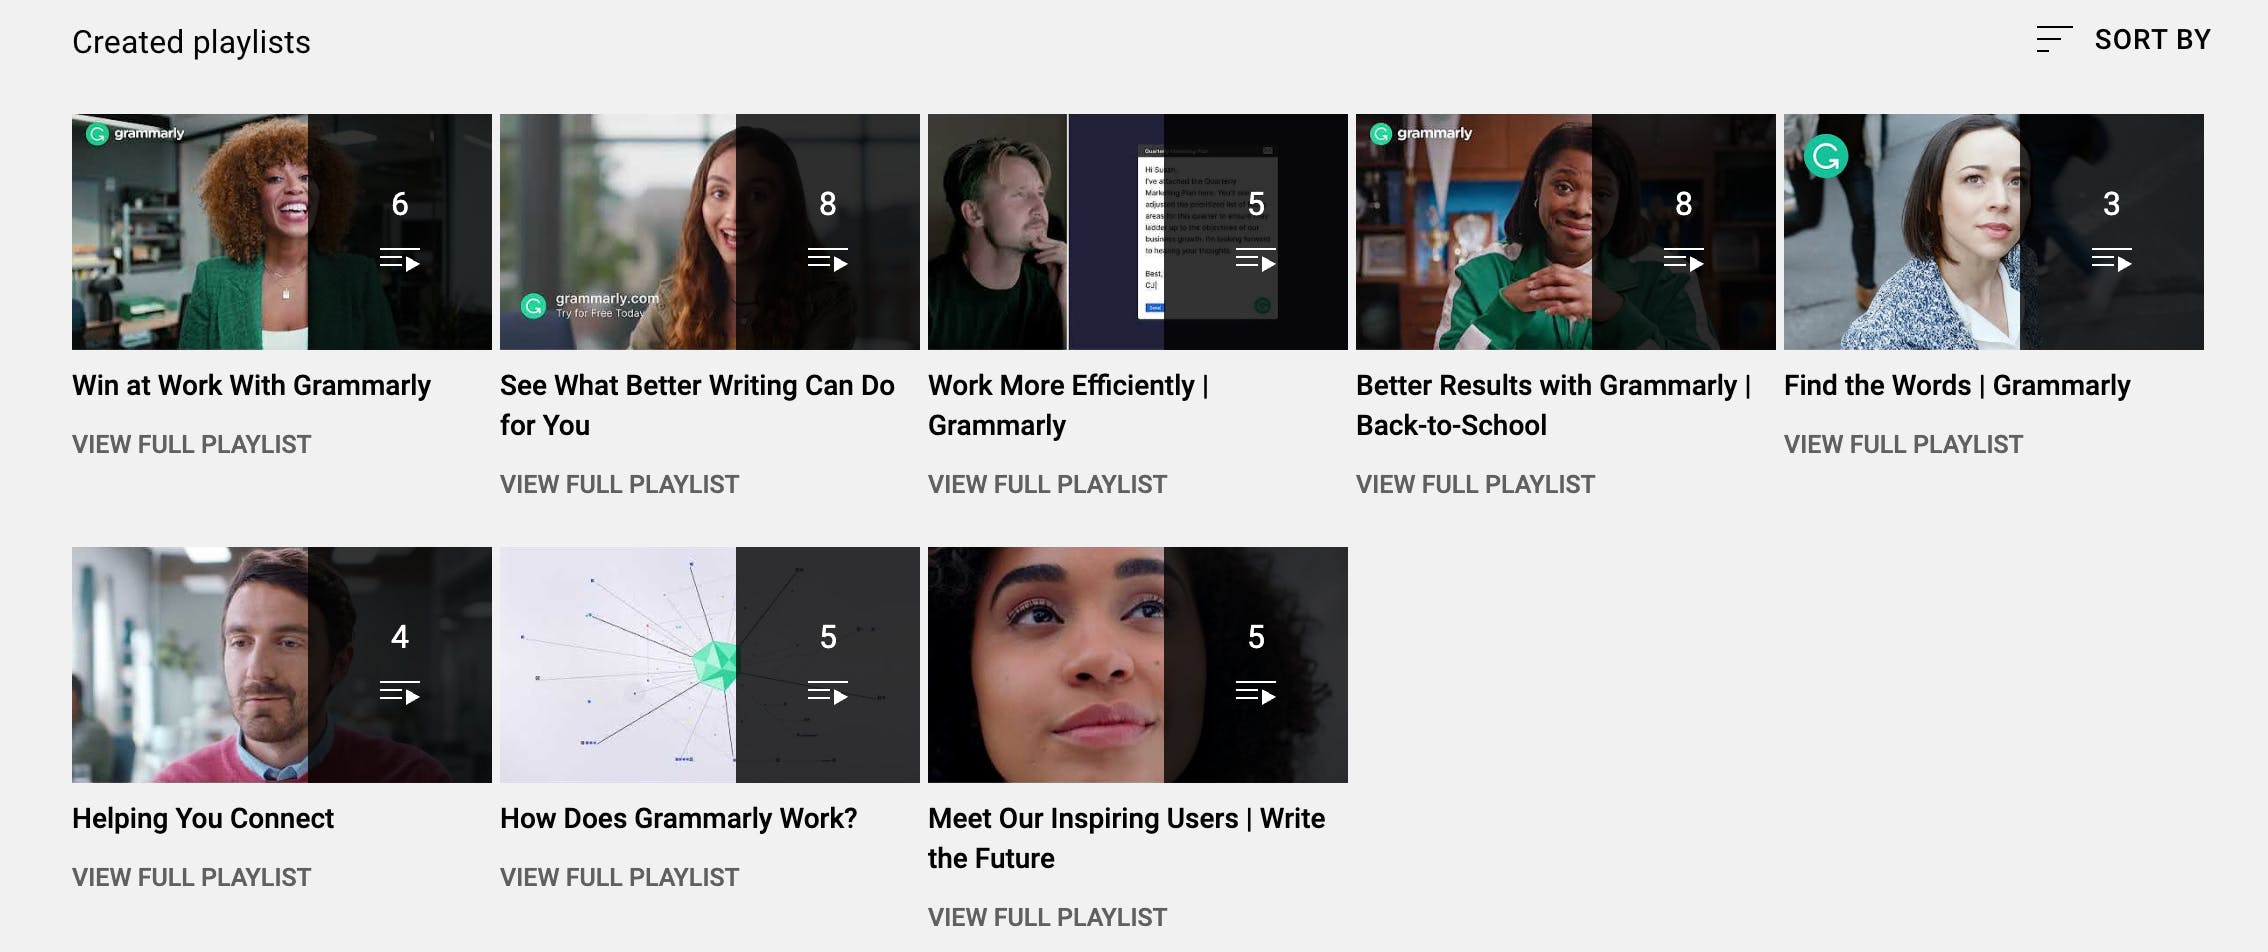 Grammarly's YouTube playlists speak to both academia and working professionals